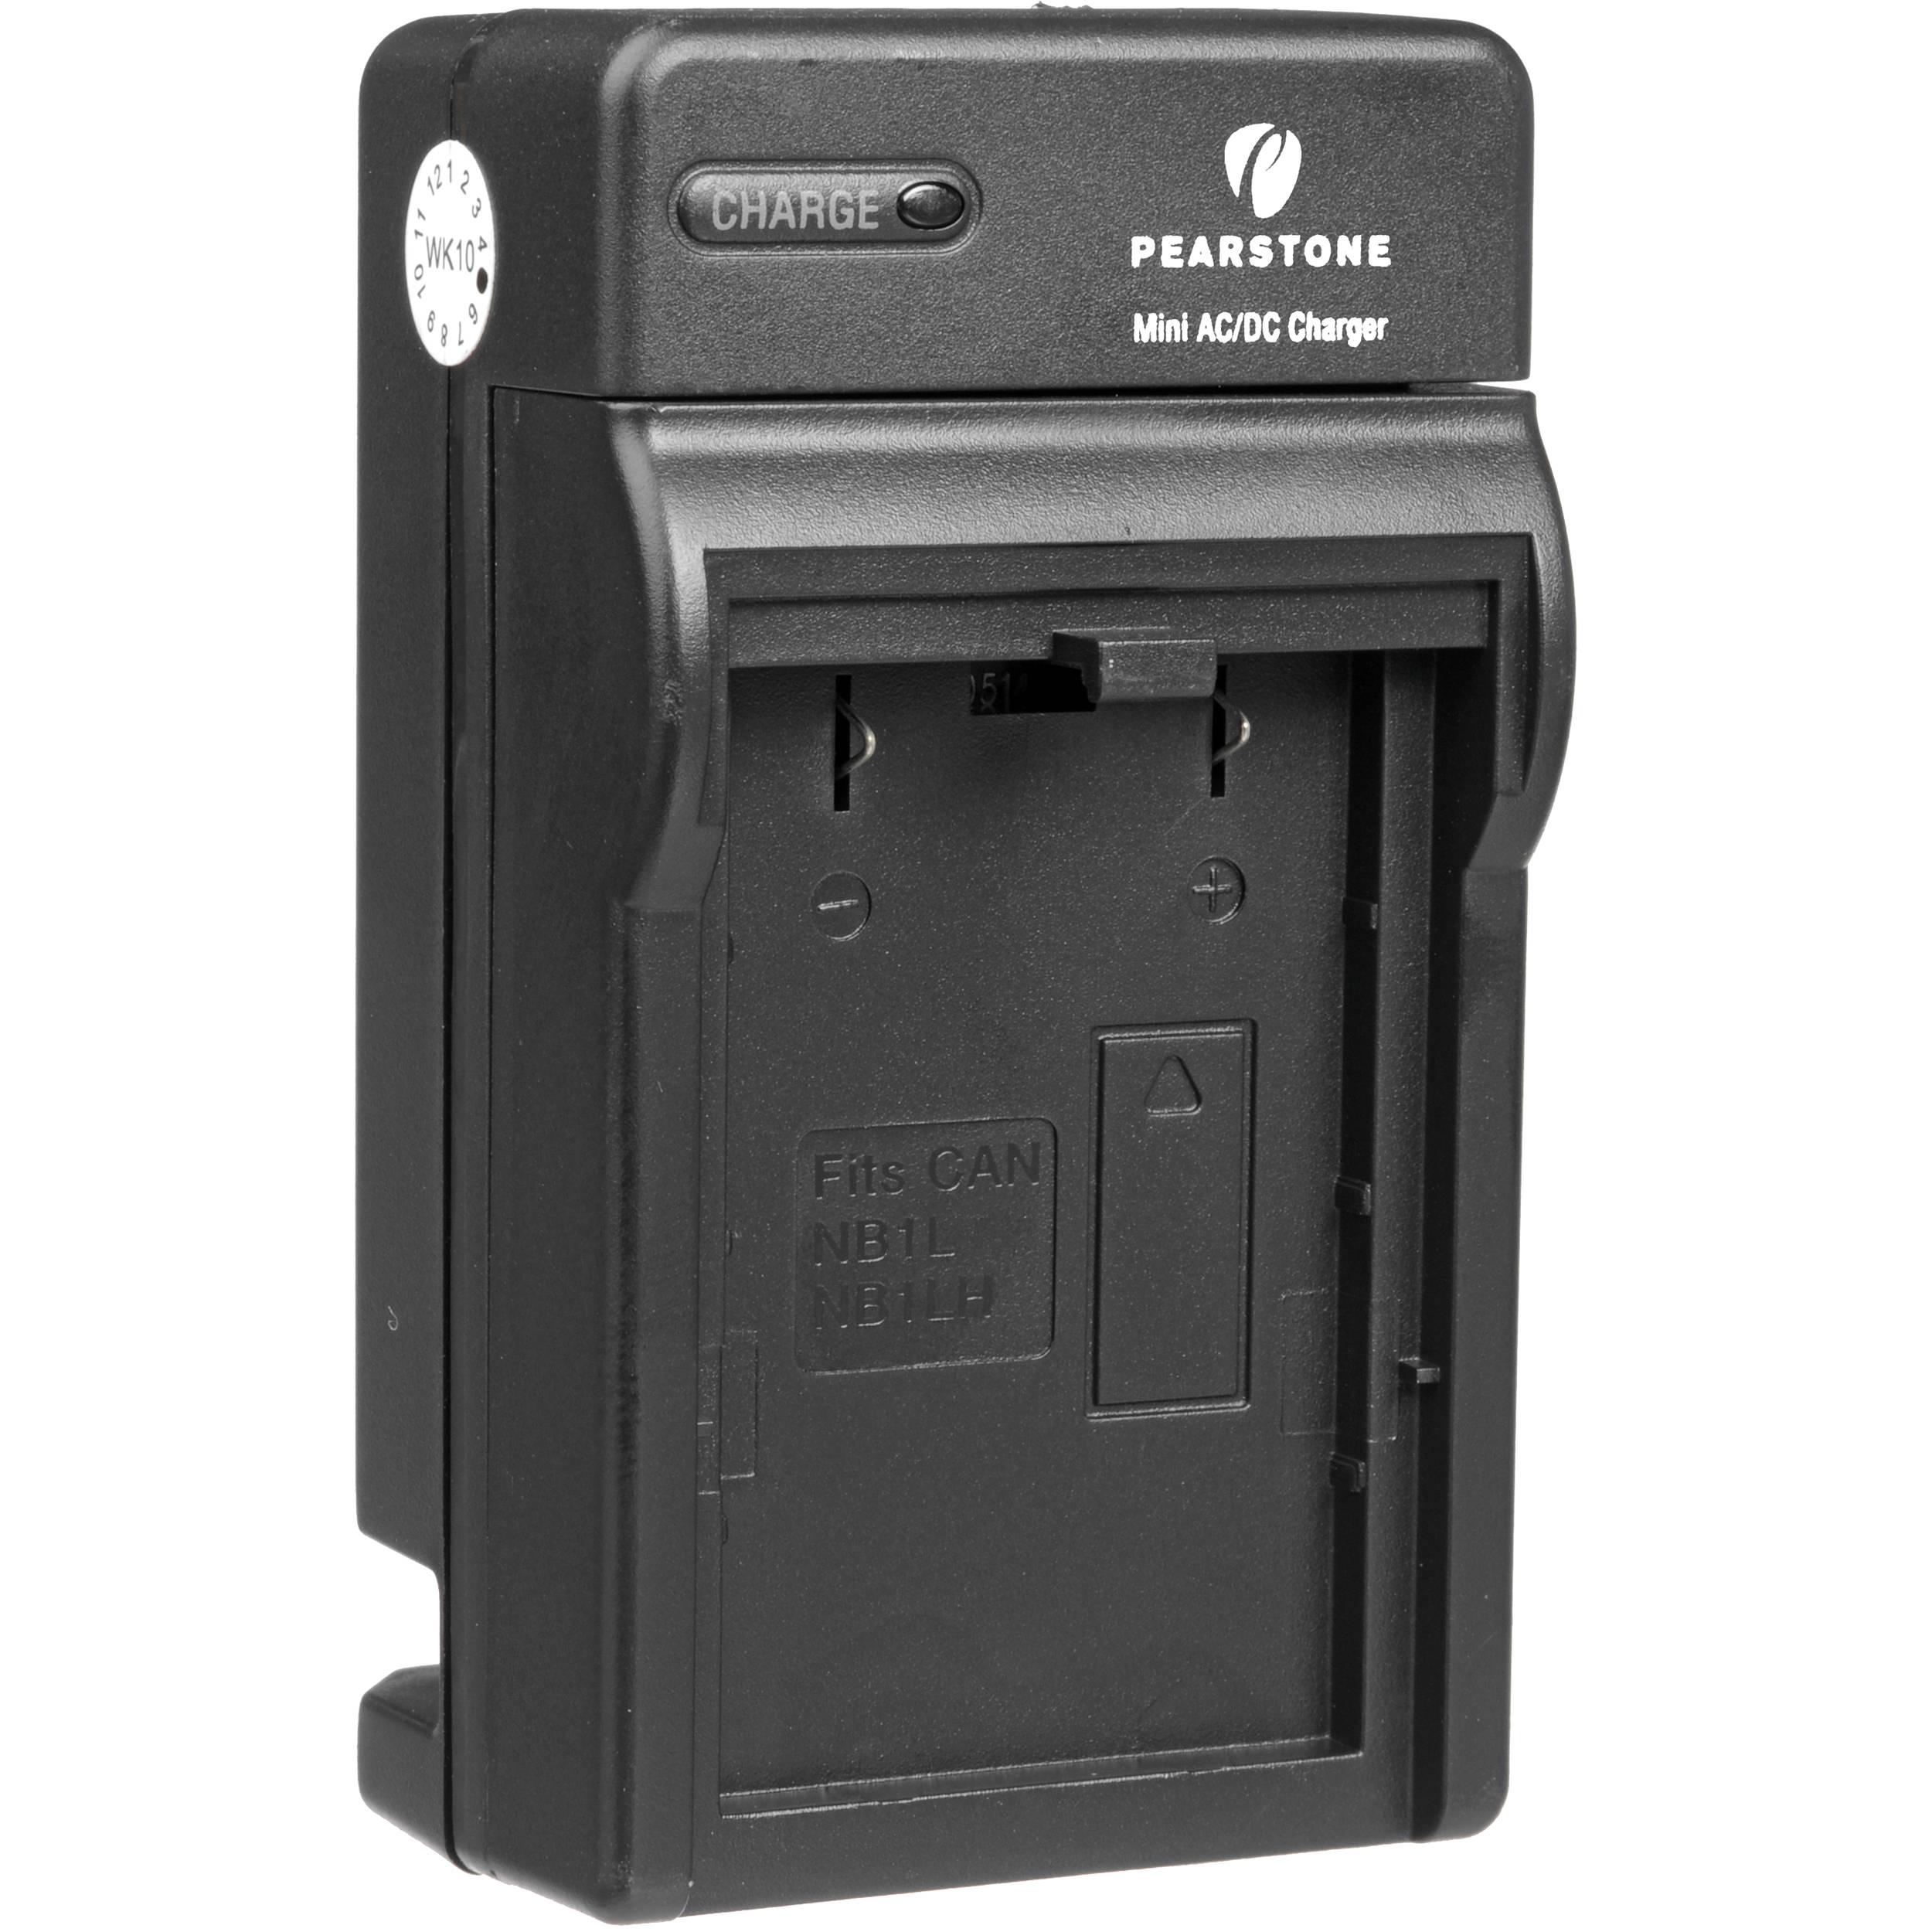 Pearstone Mini AC/DC Battery Charger 